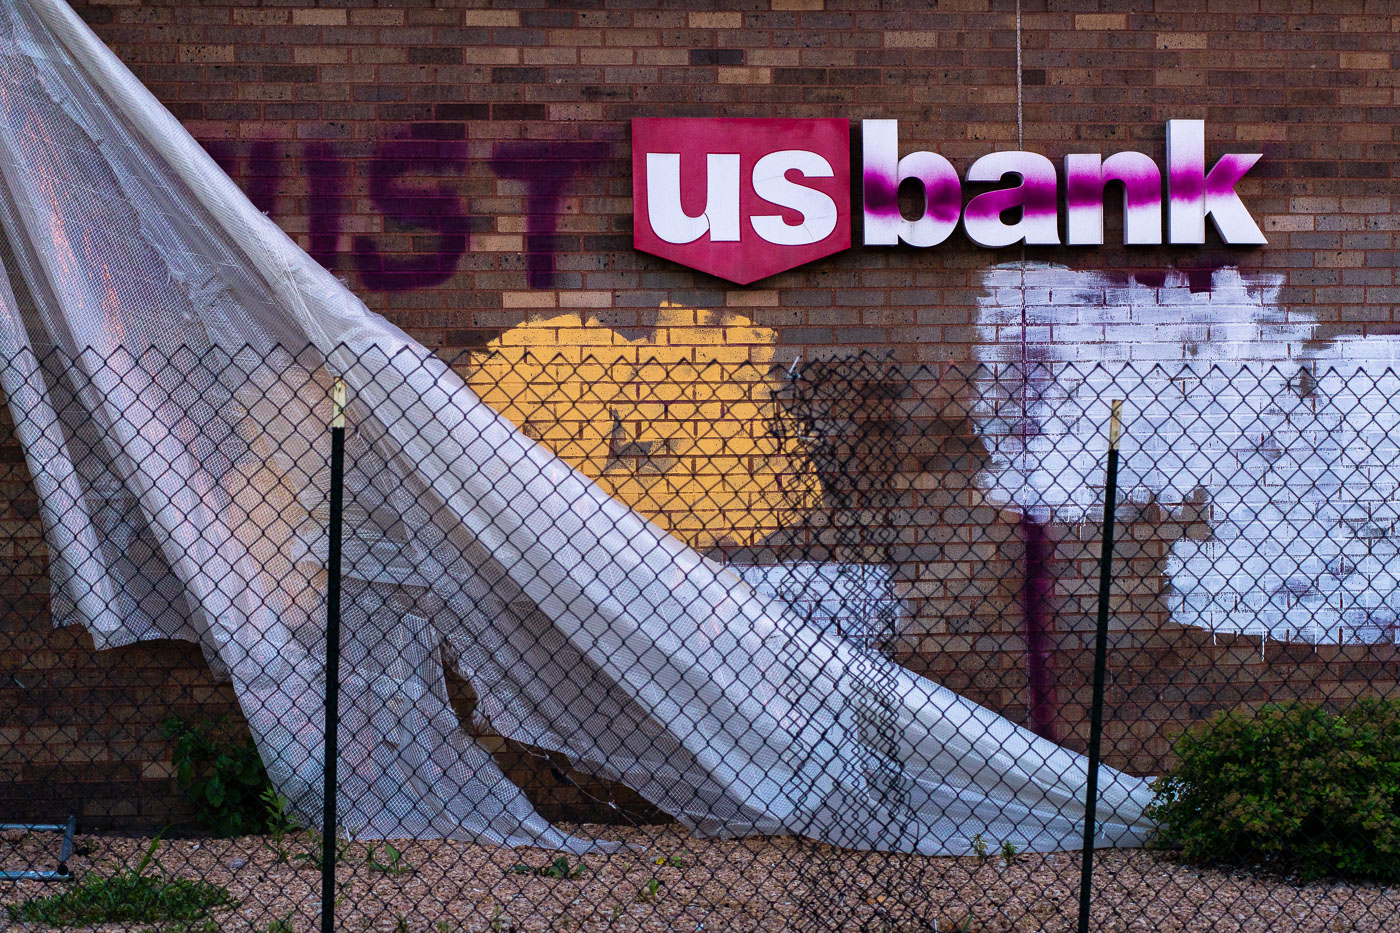 US Bank sign with graffiti crossing it out